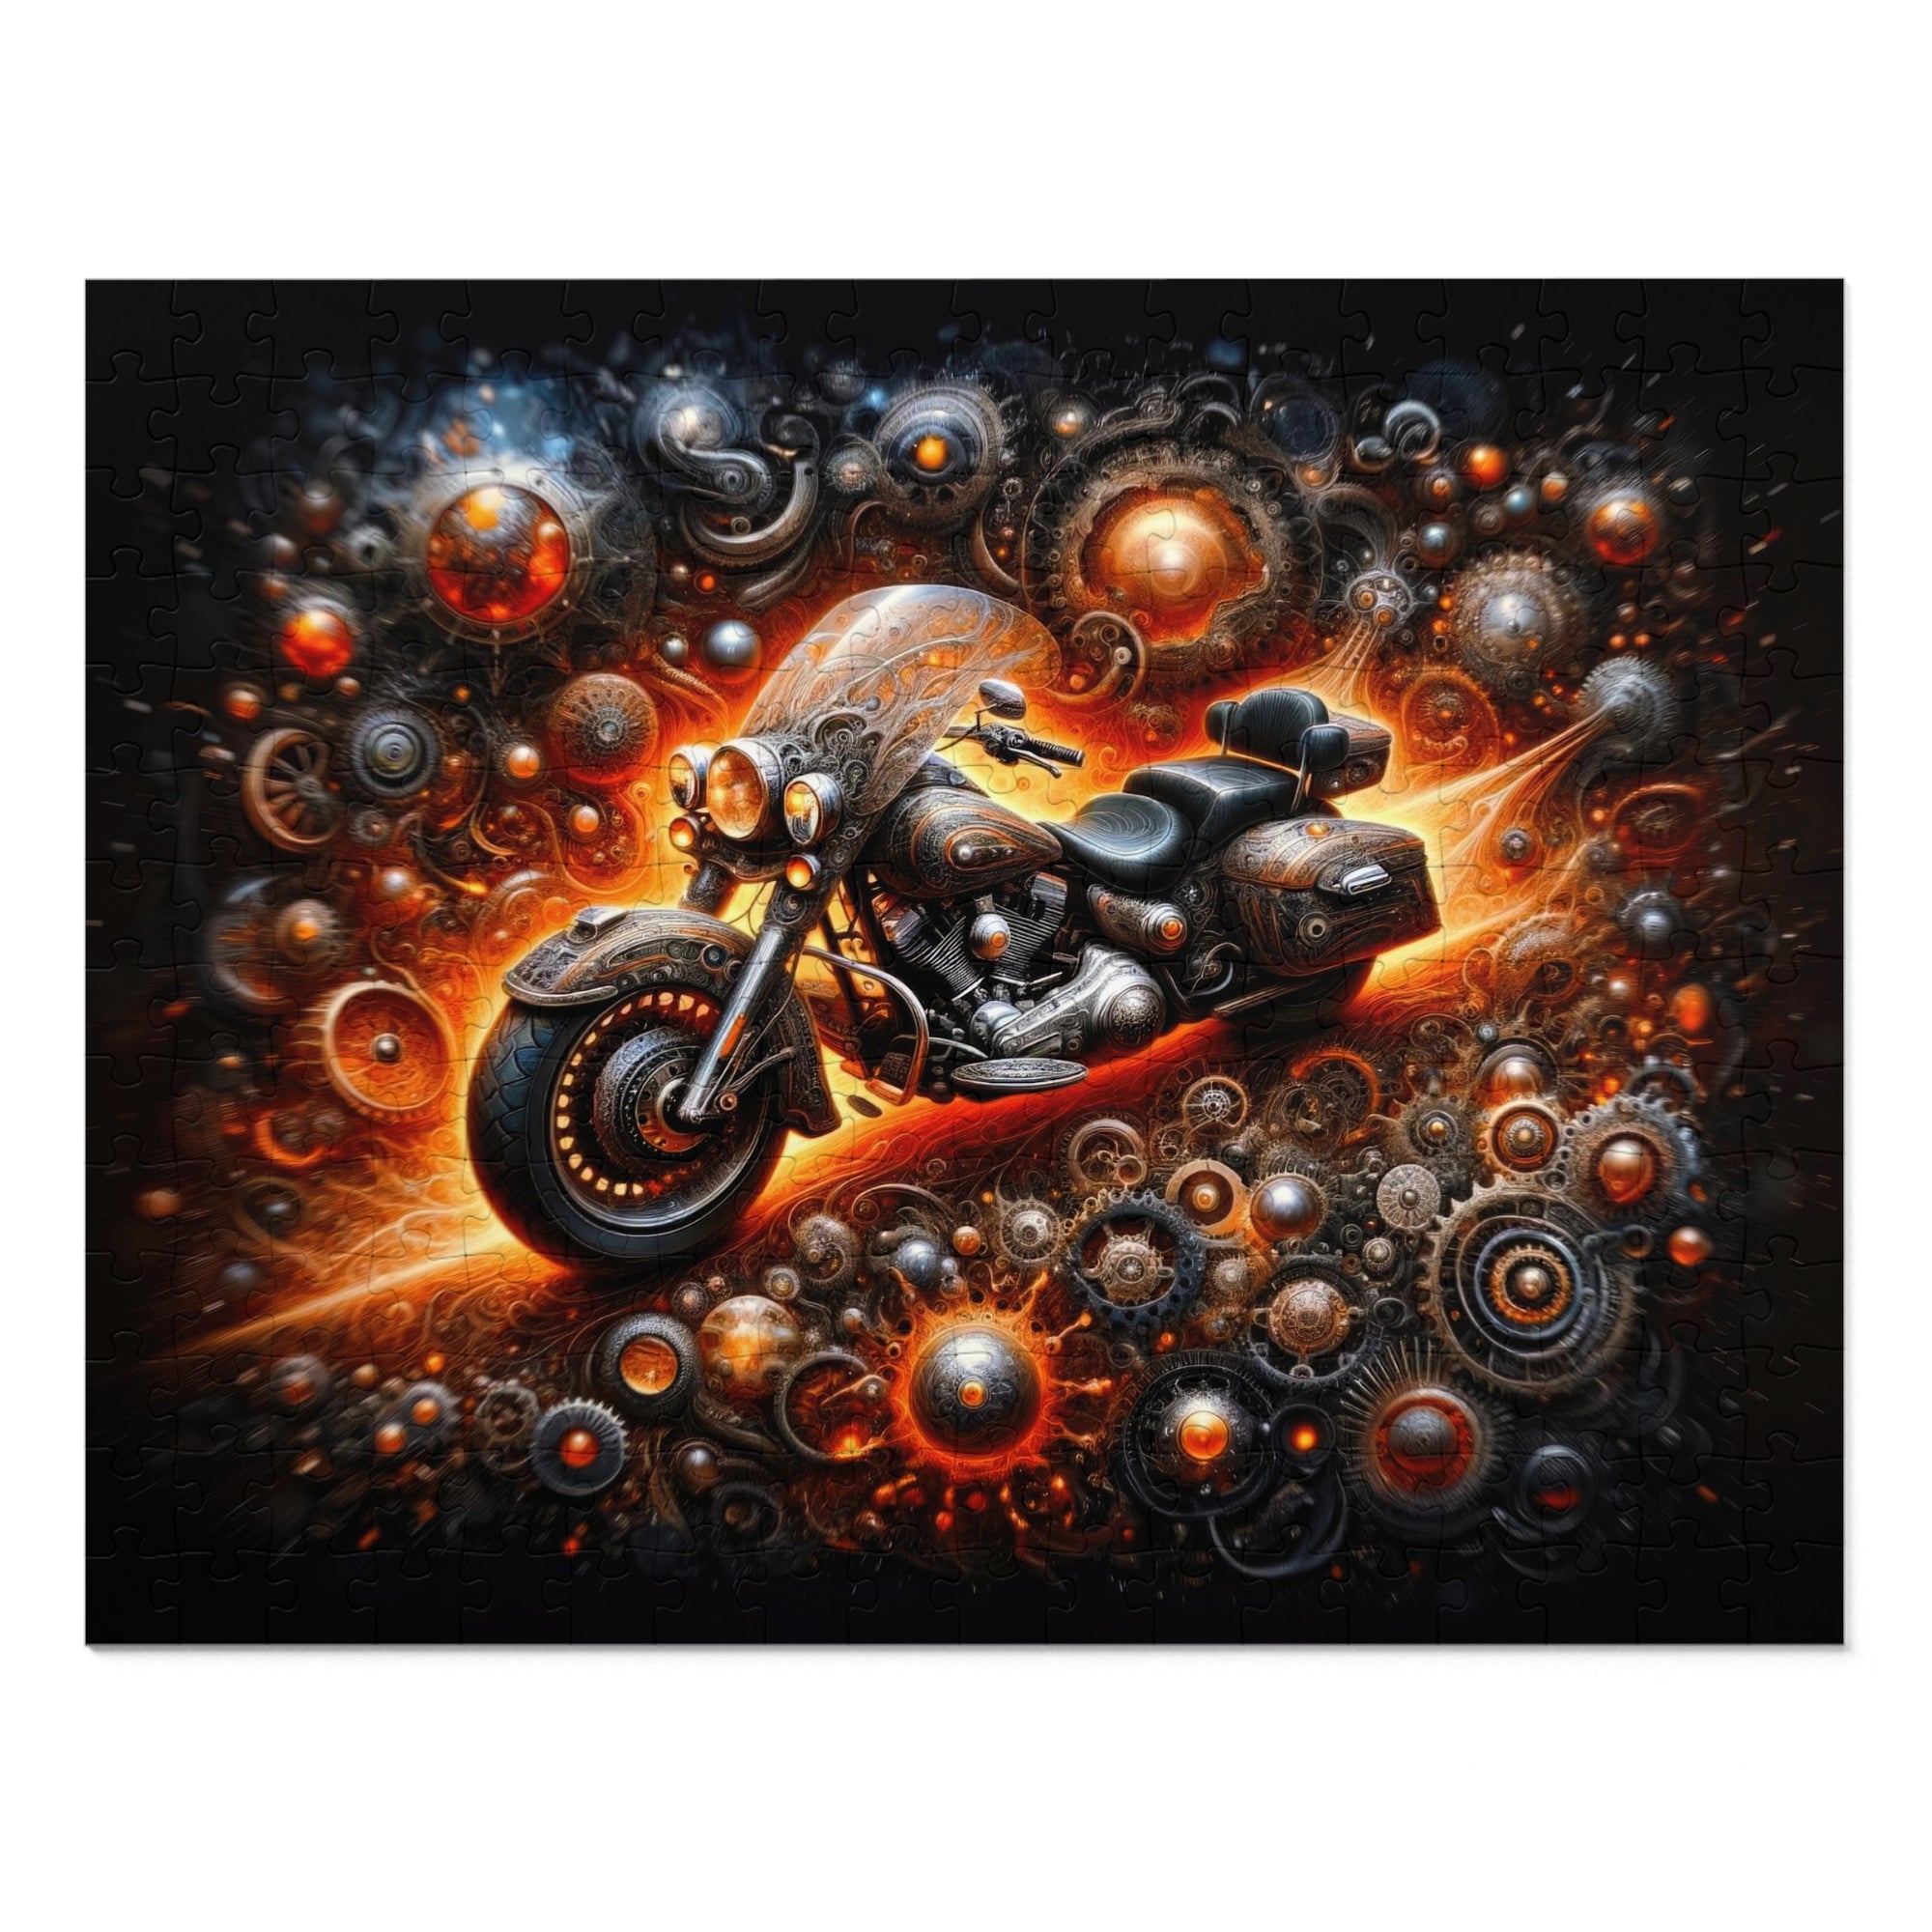 The Engine of Stars Jigsaw Puzzle